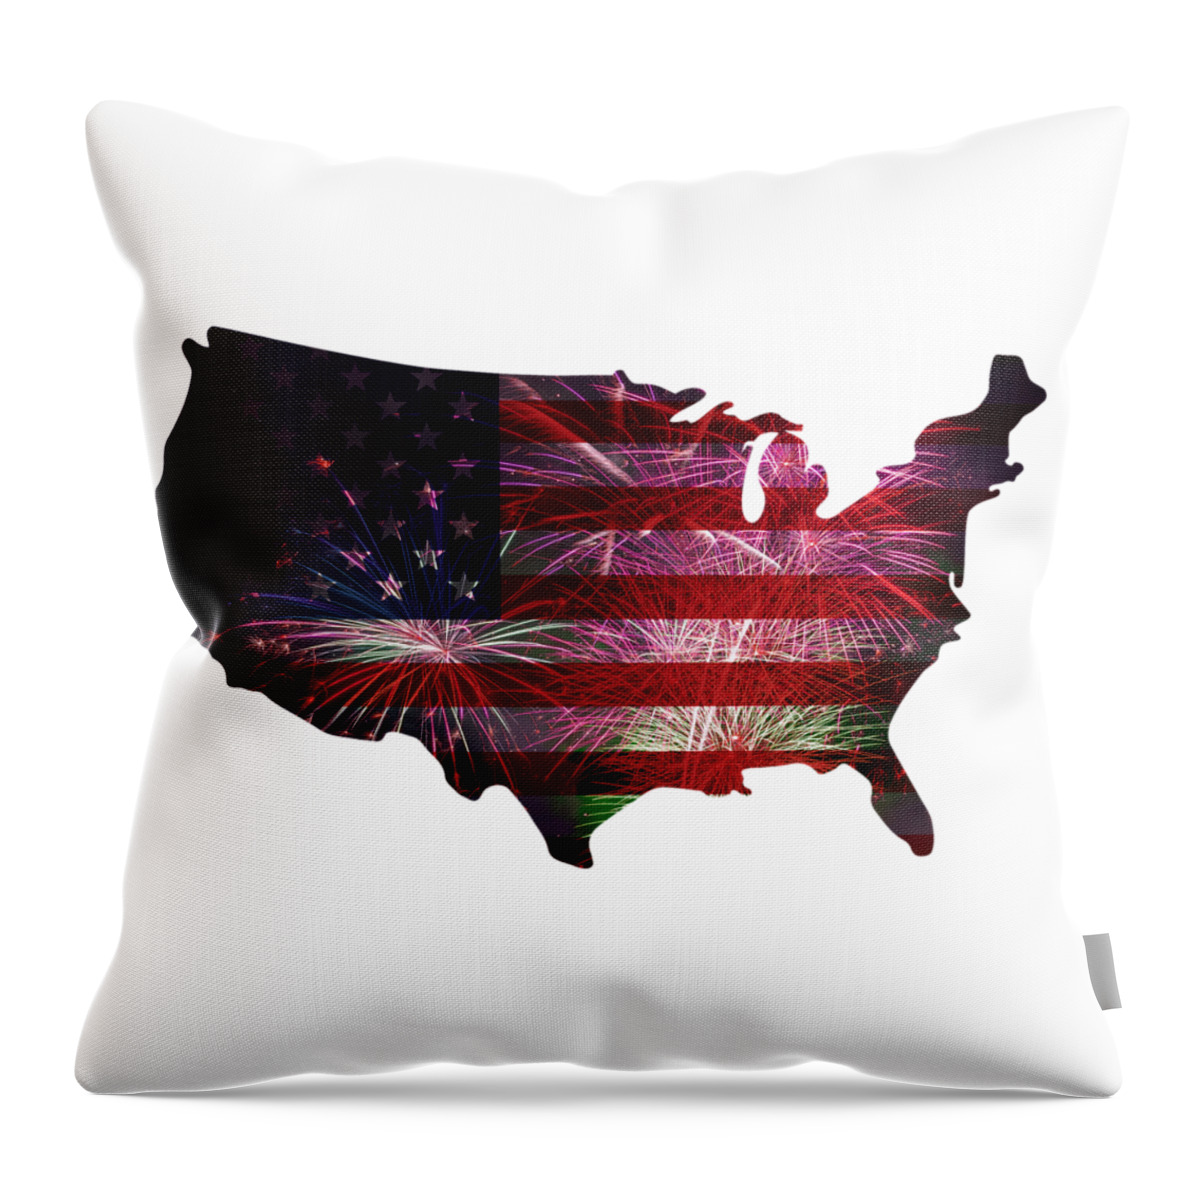 Usa; Outline; Silhouette; Flag; United States; Country; Federal; North America; Stars; Stripes; Red; White; Blue; 4th; July; Independence; Day; Happy; Fireworks; Display; Celebration; Patriotic; Government; Burst; Background; Illustration; Drawing; Souvenir; Poster Throw Pillow featuring the photograph American Flag with Fireworks Display #1 by David Gn